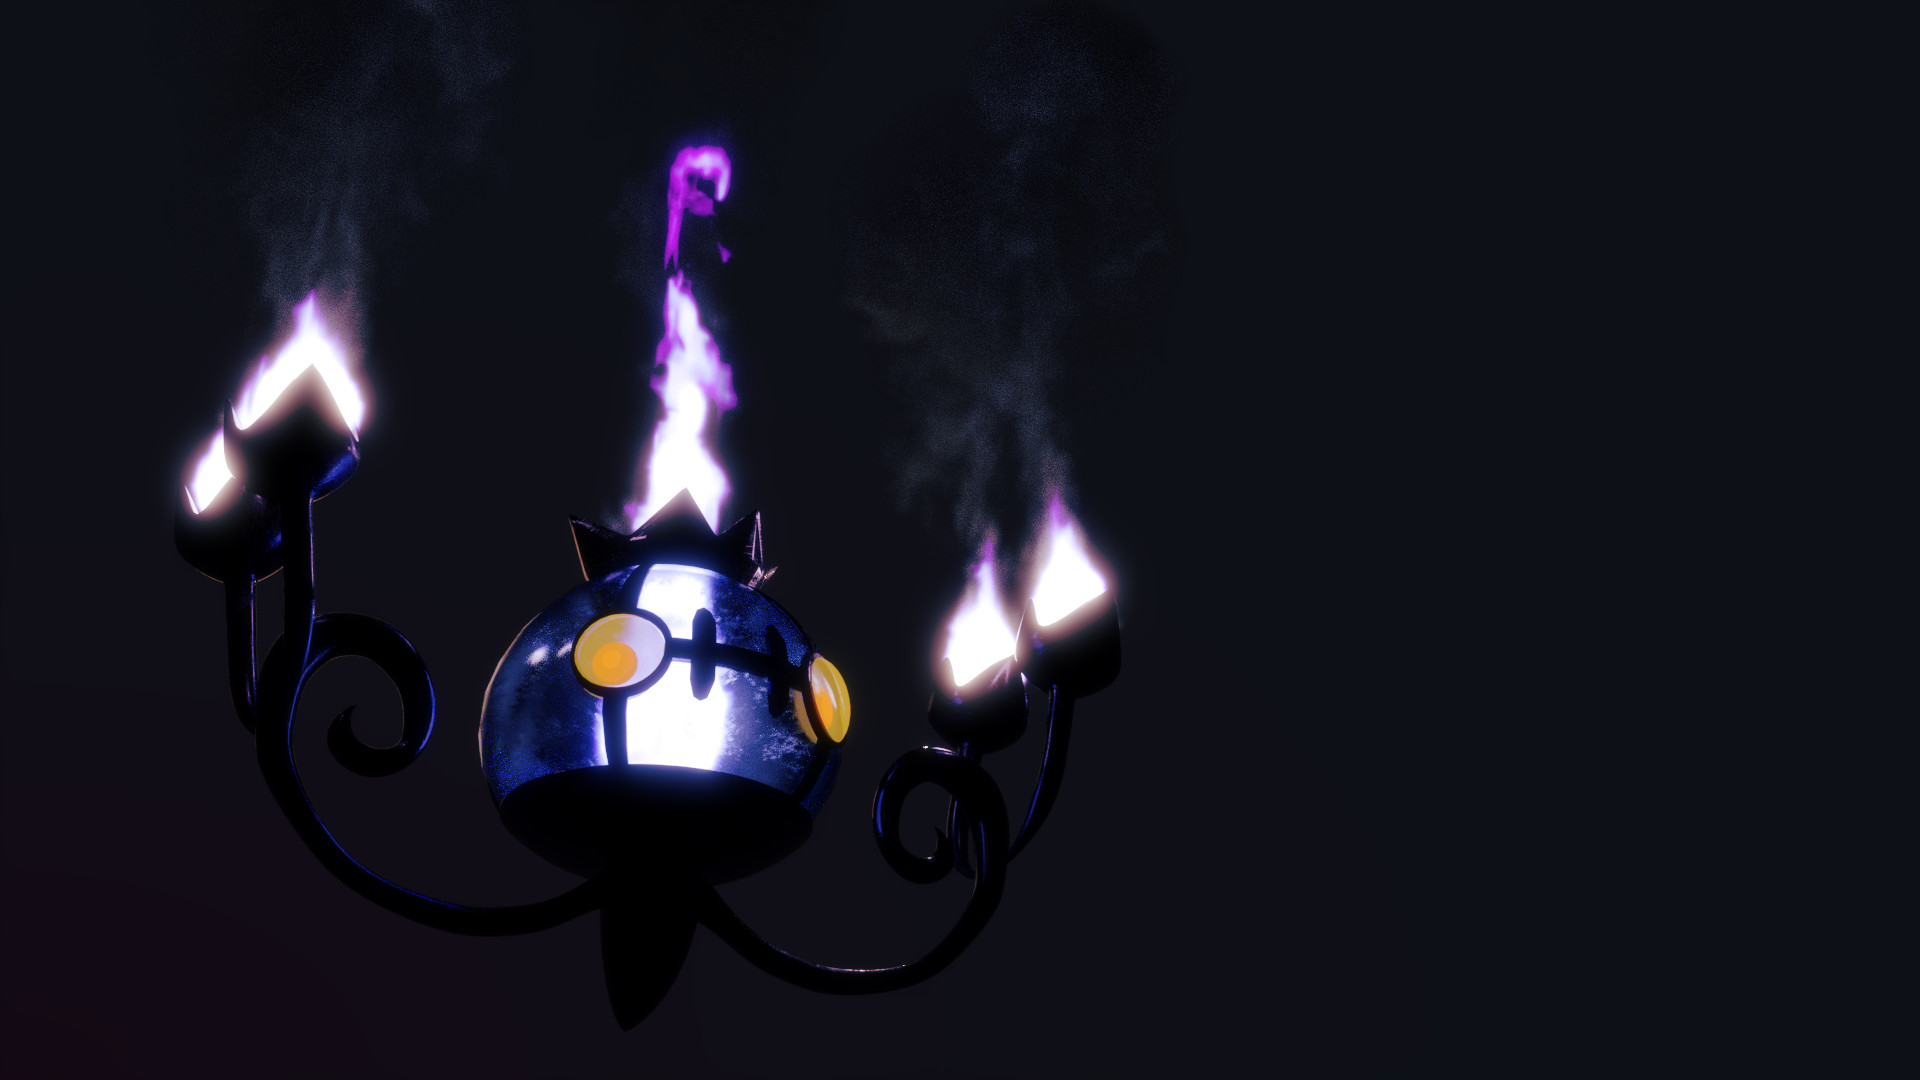 Chandelure caught my attention by its peculiar design. 